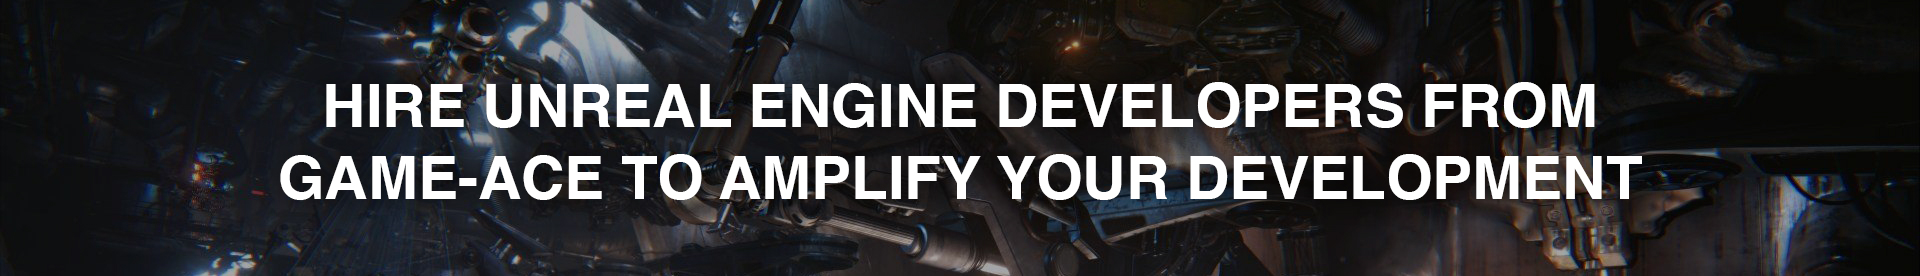 Hire Unreal Engine developers